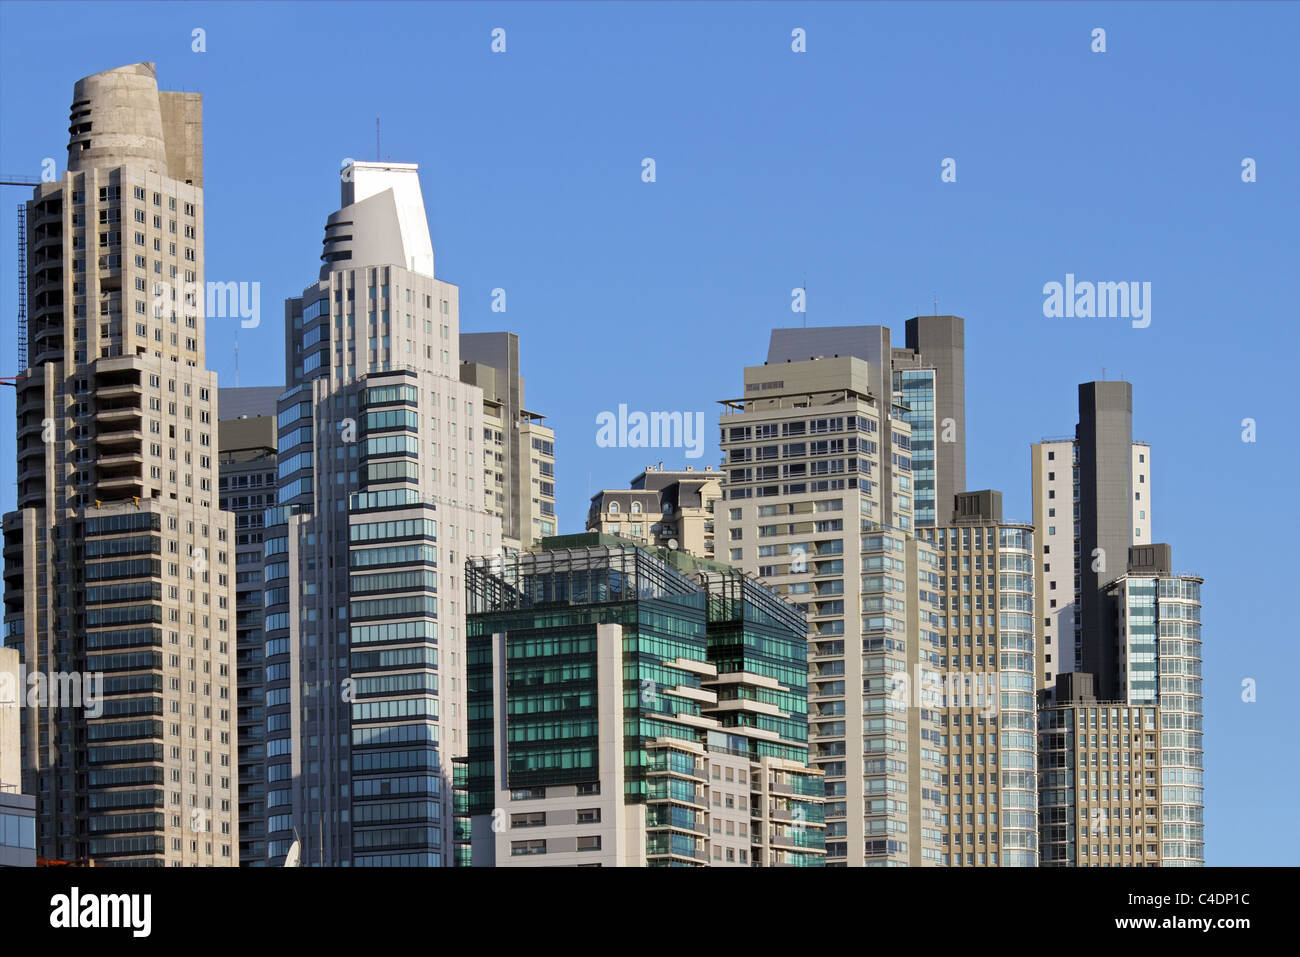 Towering city skyscraper buildings in the city of Buenos Aires Stock Photo